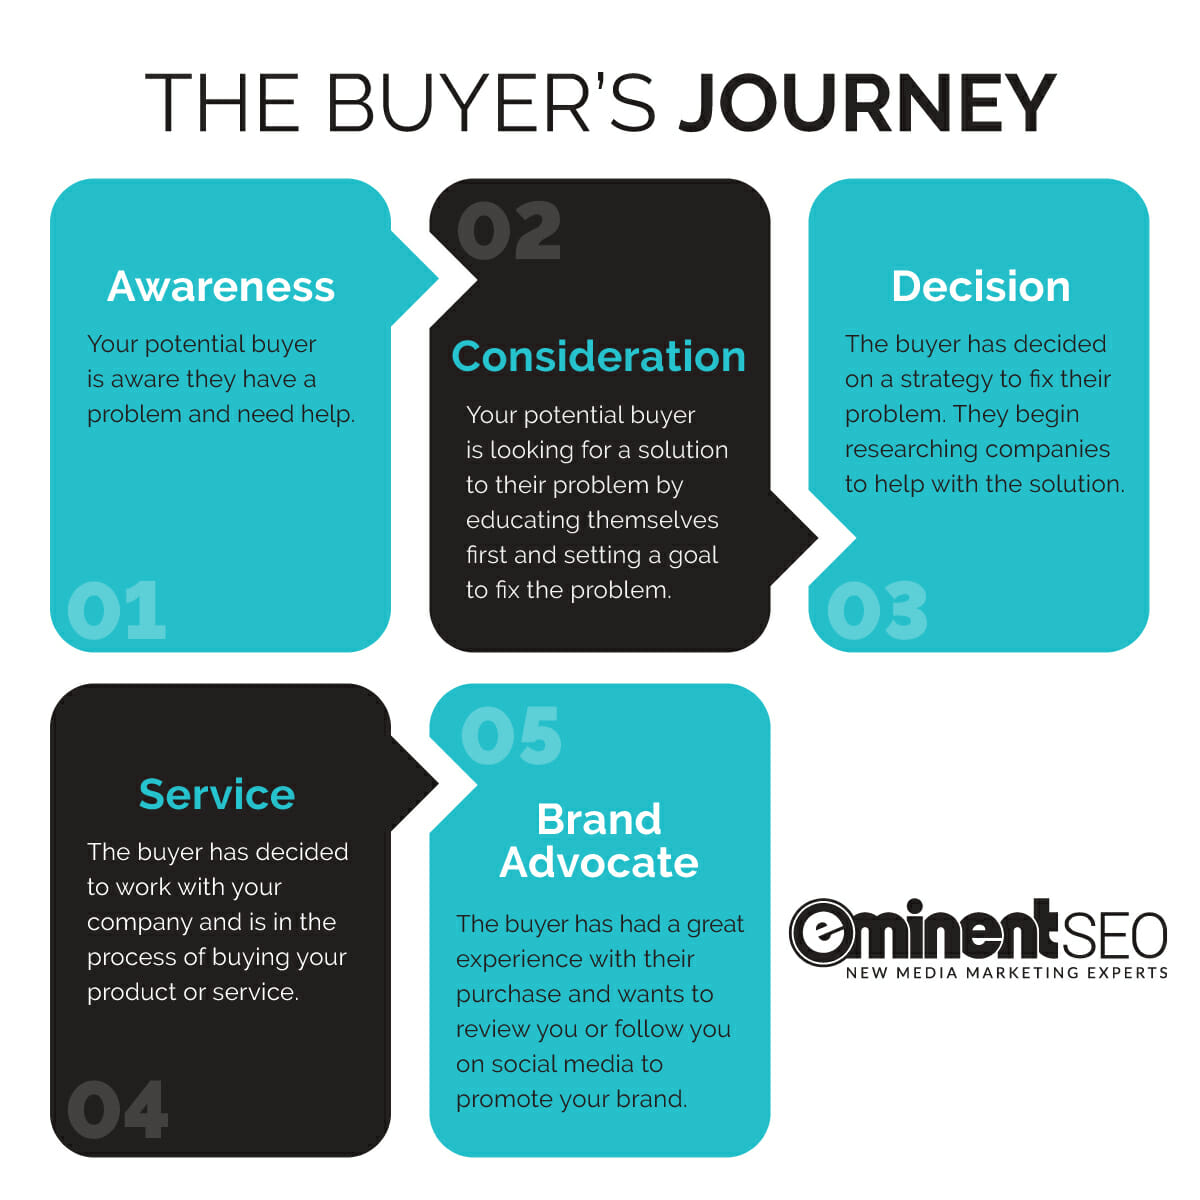 Five Stages Of The Buyers Journey - Eminent SEO